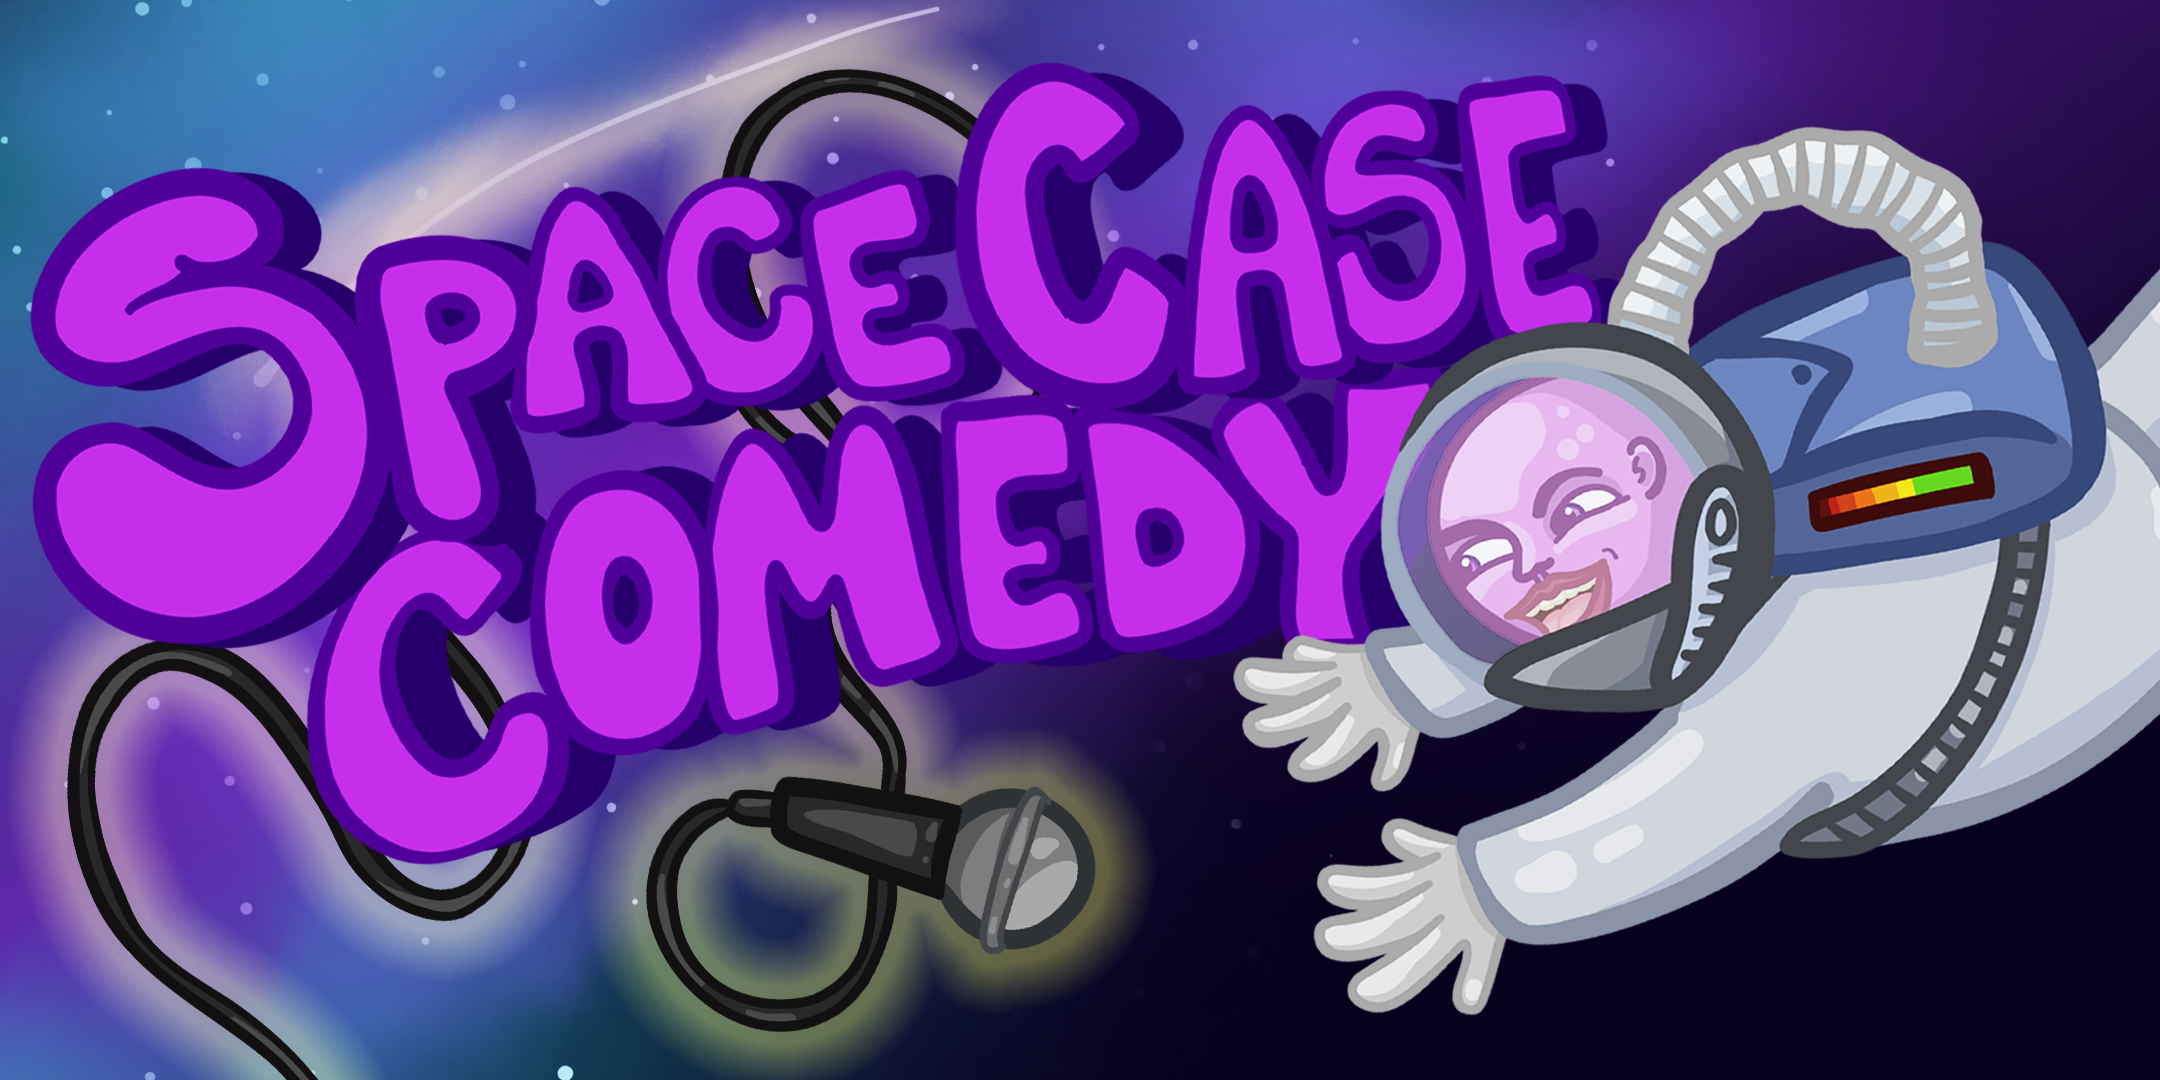 Space Case Comedy